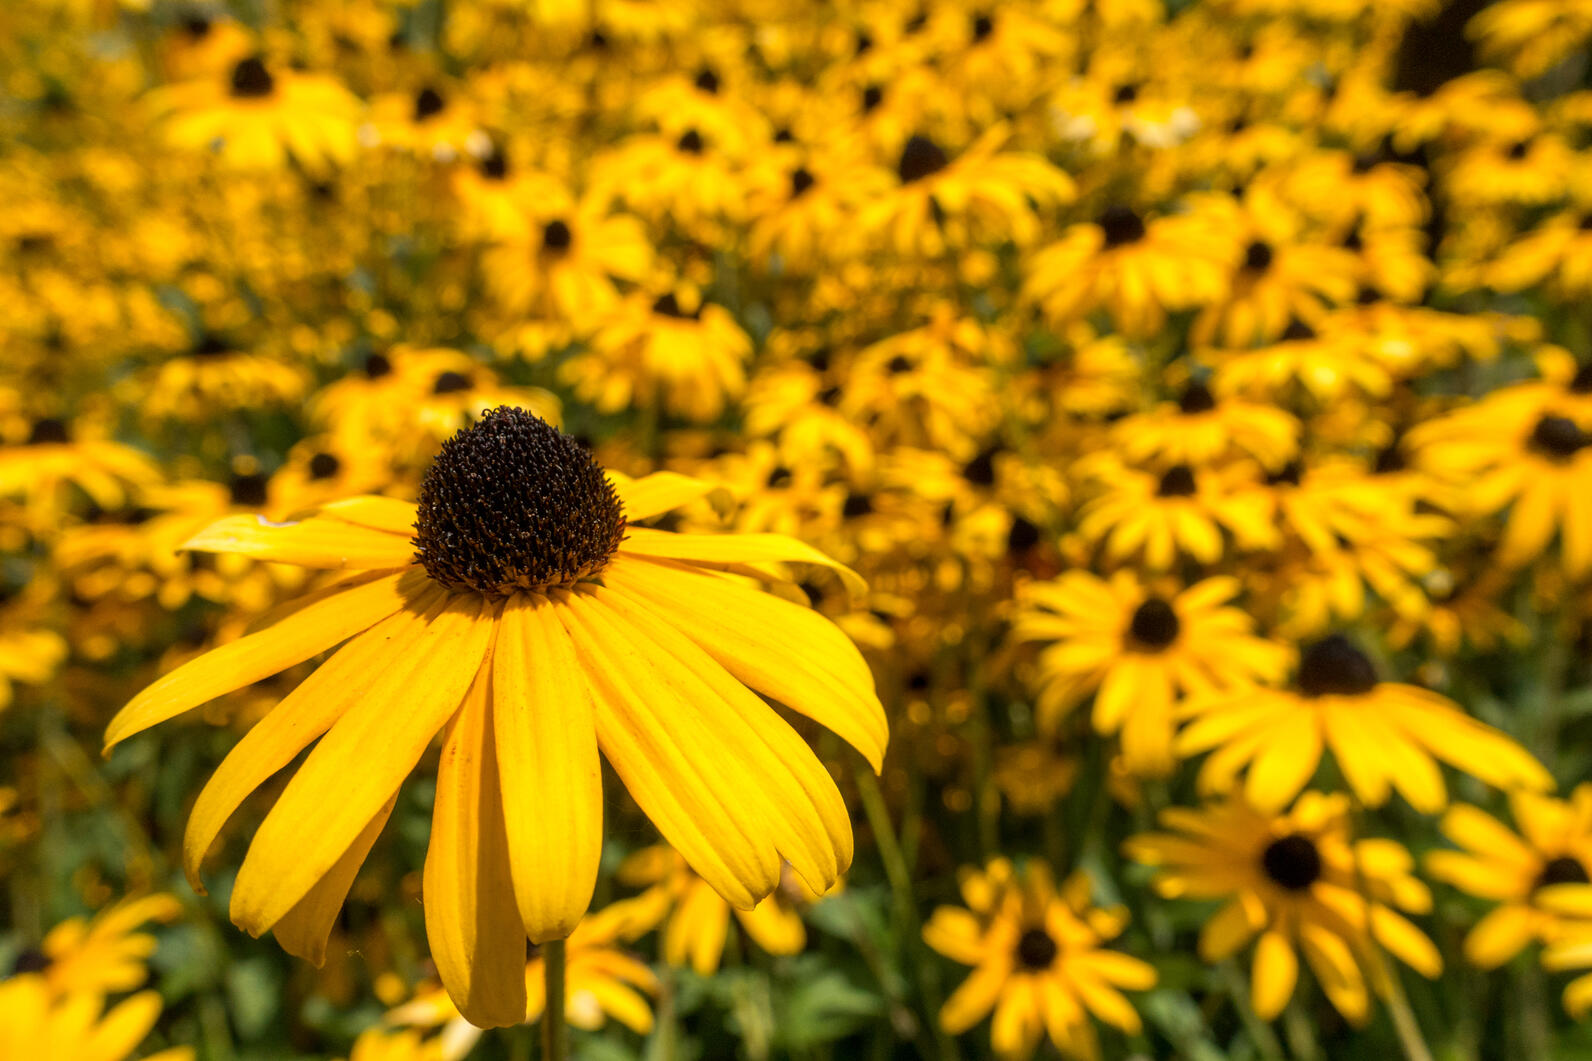 A field of black-eyed susans, with the front and center flower the most clear.